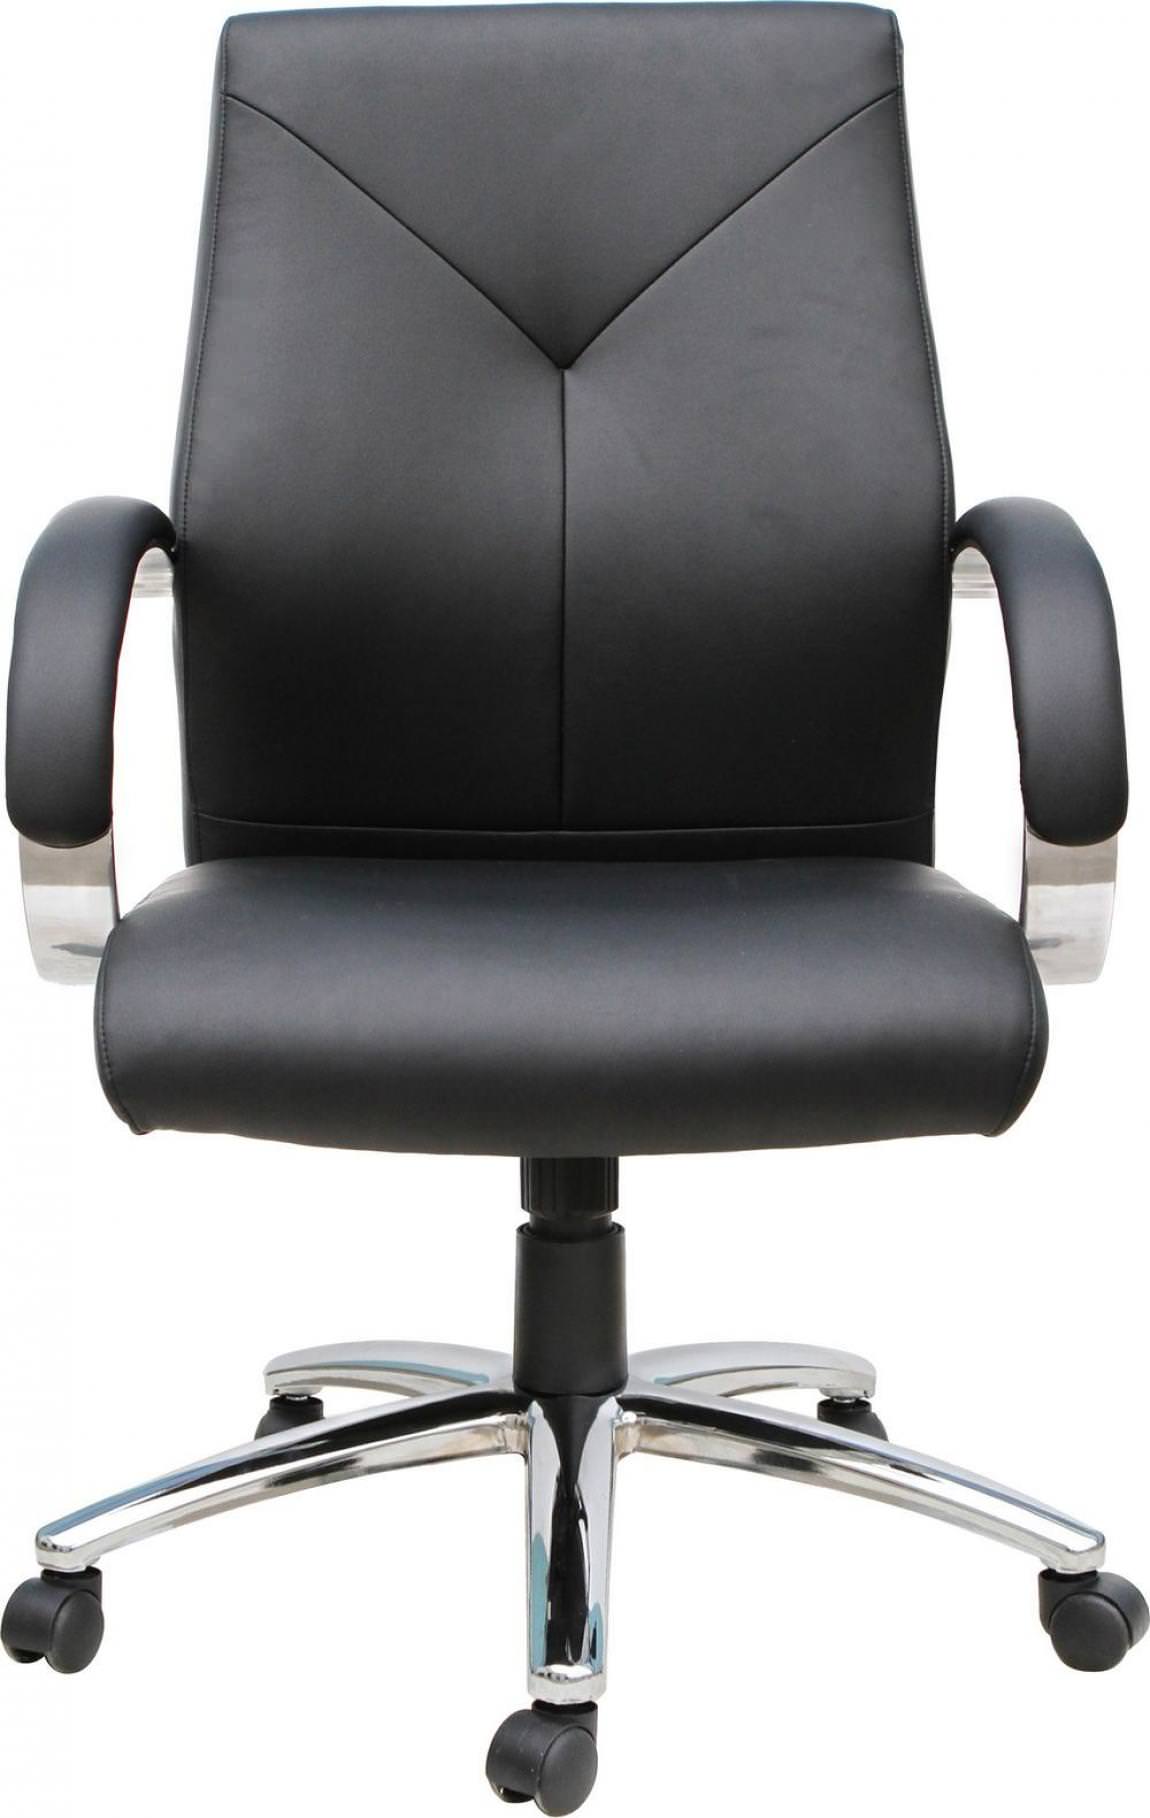 Stylish Management & Conference Room Aluminum Cast Chair